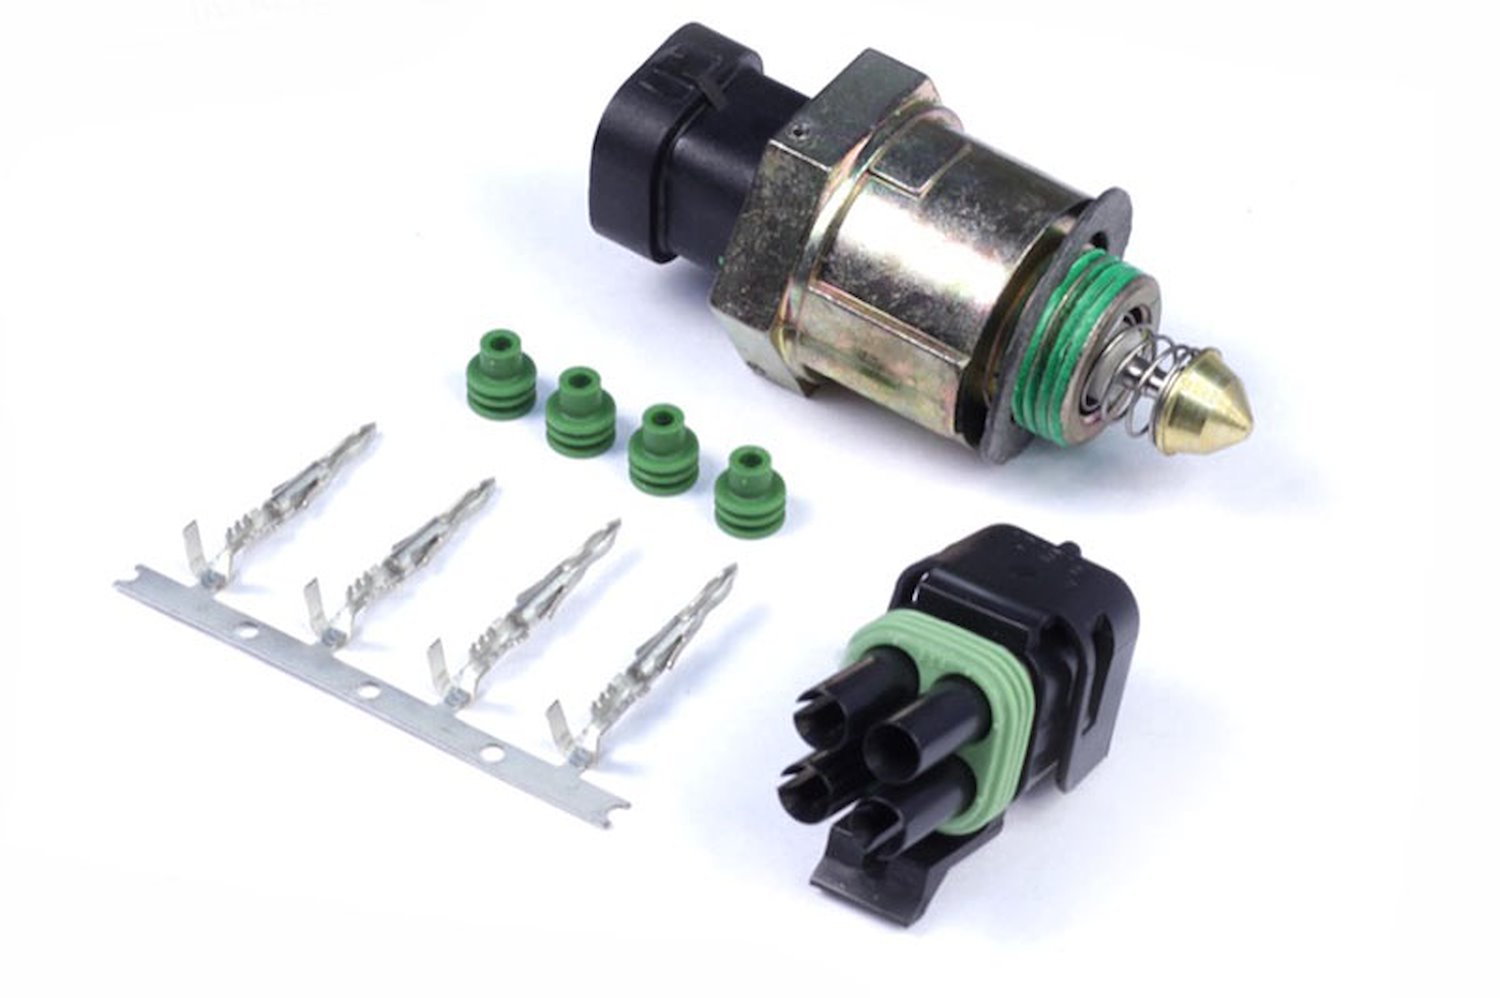 HT-020302 Idle Air Control Motor, Screw-In, Includes Plug and-Pins